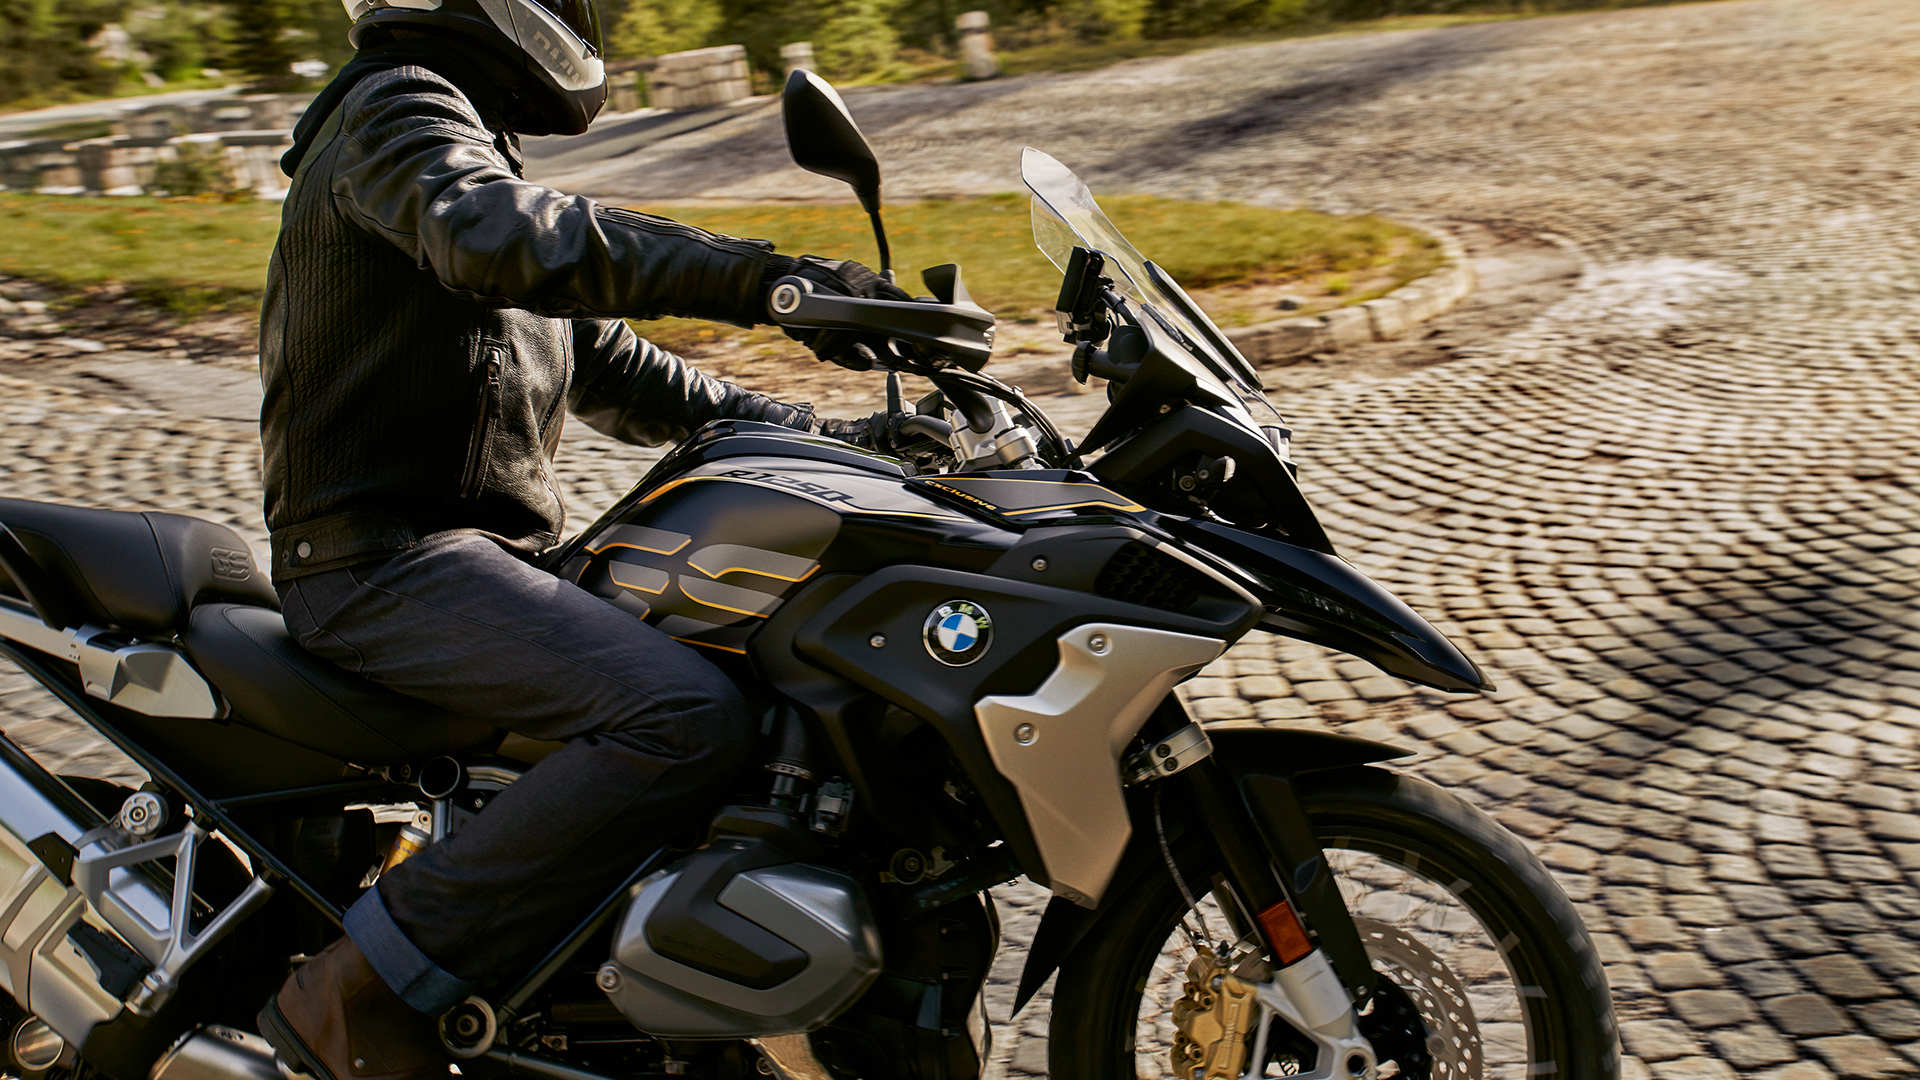 BMW R 1250 GS Motorcycle Prices, Full Technical Specifications